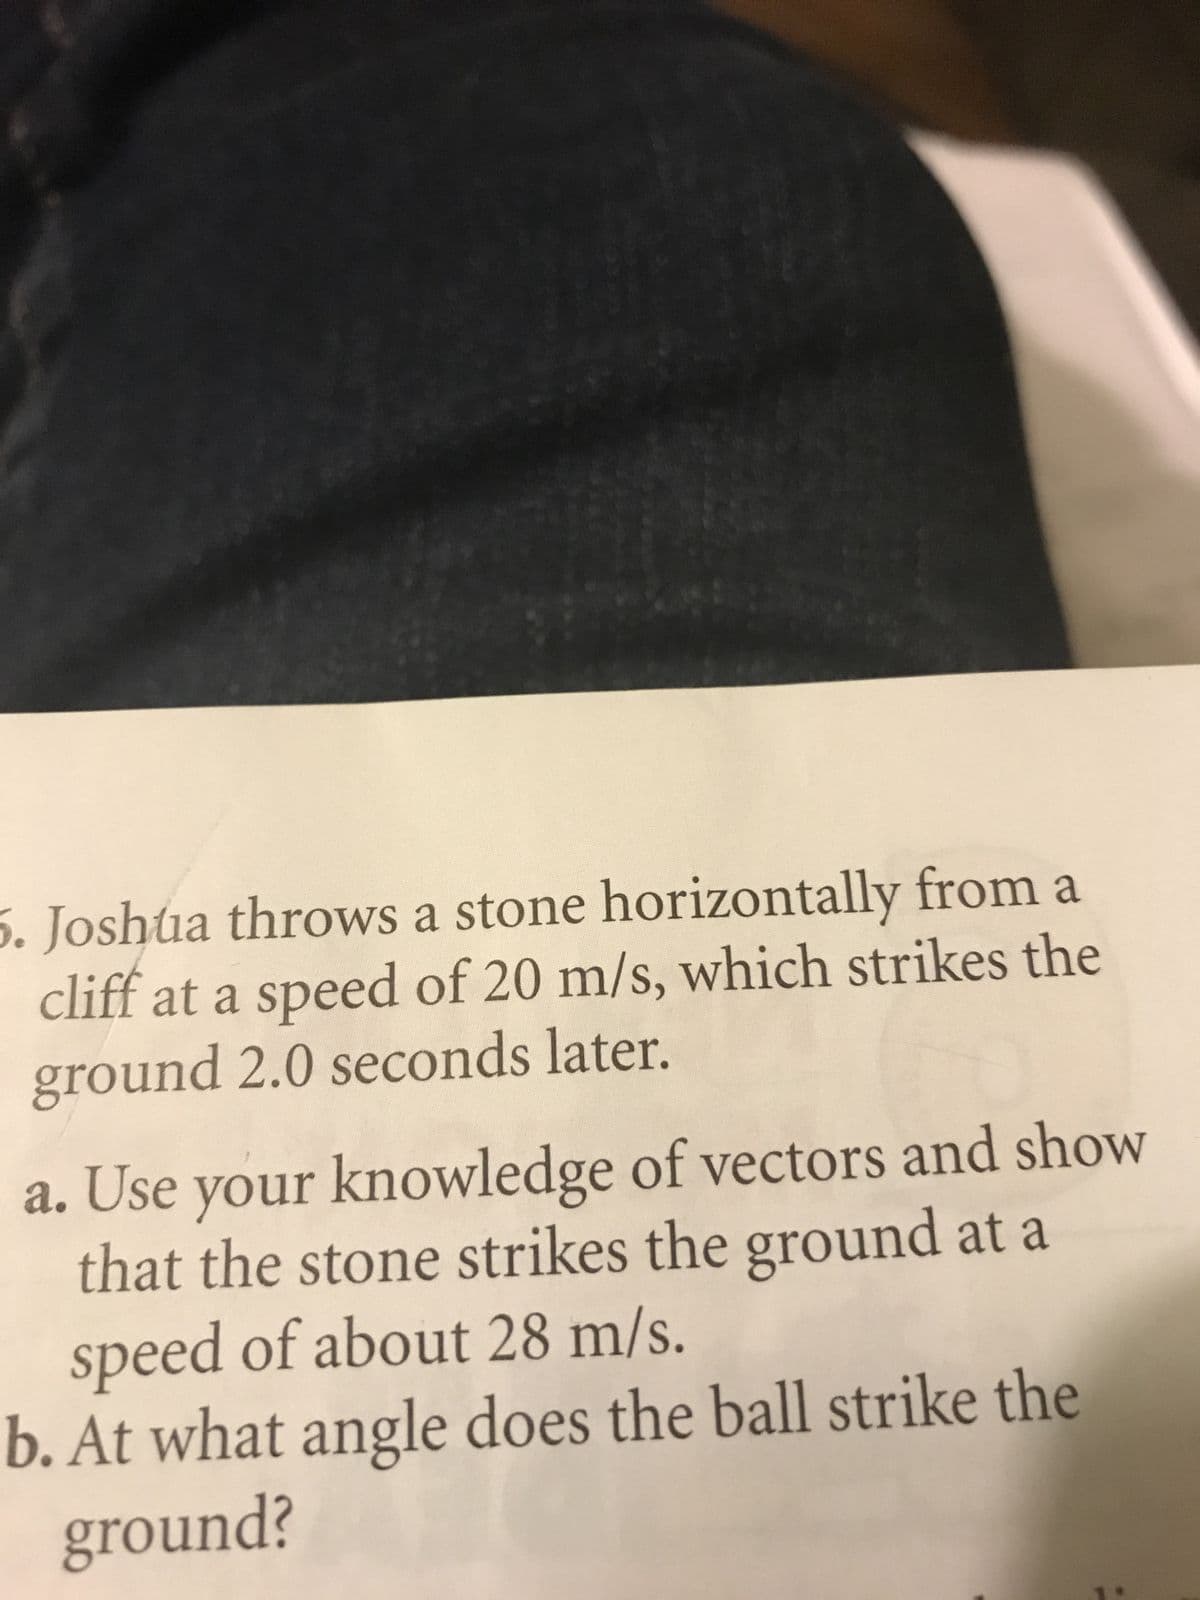 5. Joshtua throws a stone horizontally from a
cliff at a speed of 20 m/s, which strikes the
ground 2.0 seconds later.
a. Use your knowledge of vectors and show
that the stone strikes the ground at a
speed of about 28 m/s.
b. At what angle does the ball strike the
¿puno18
